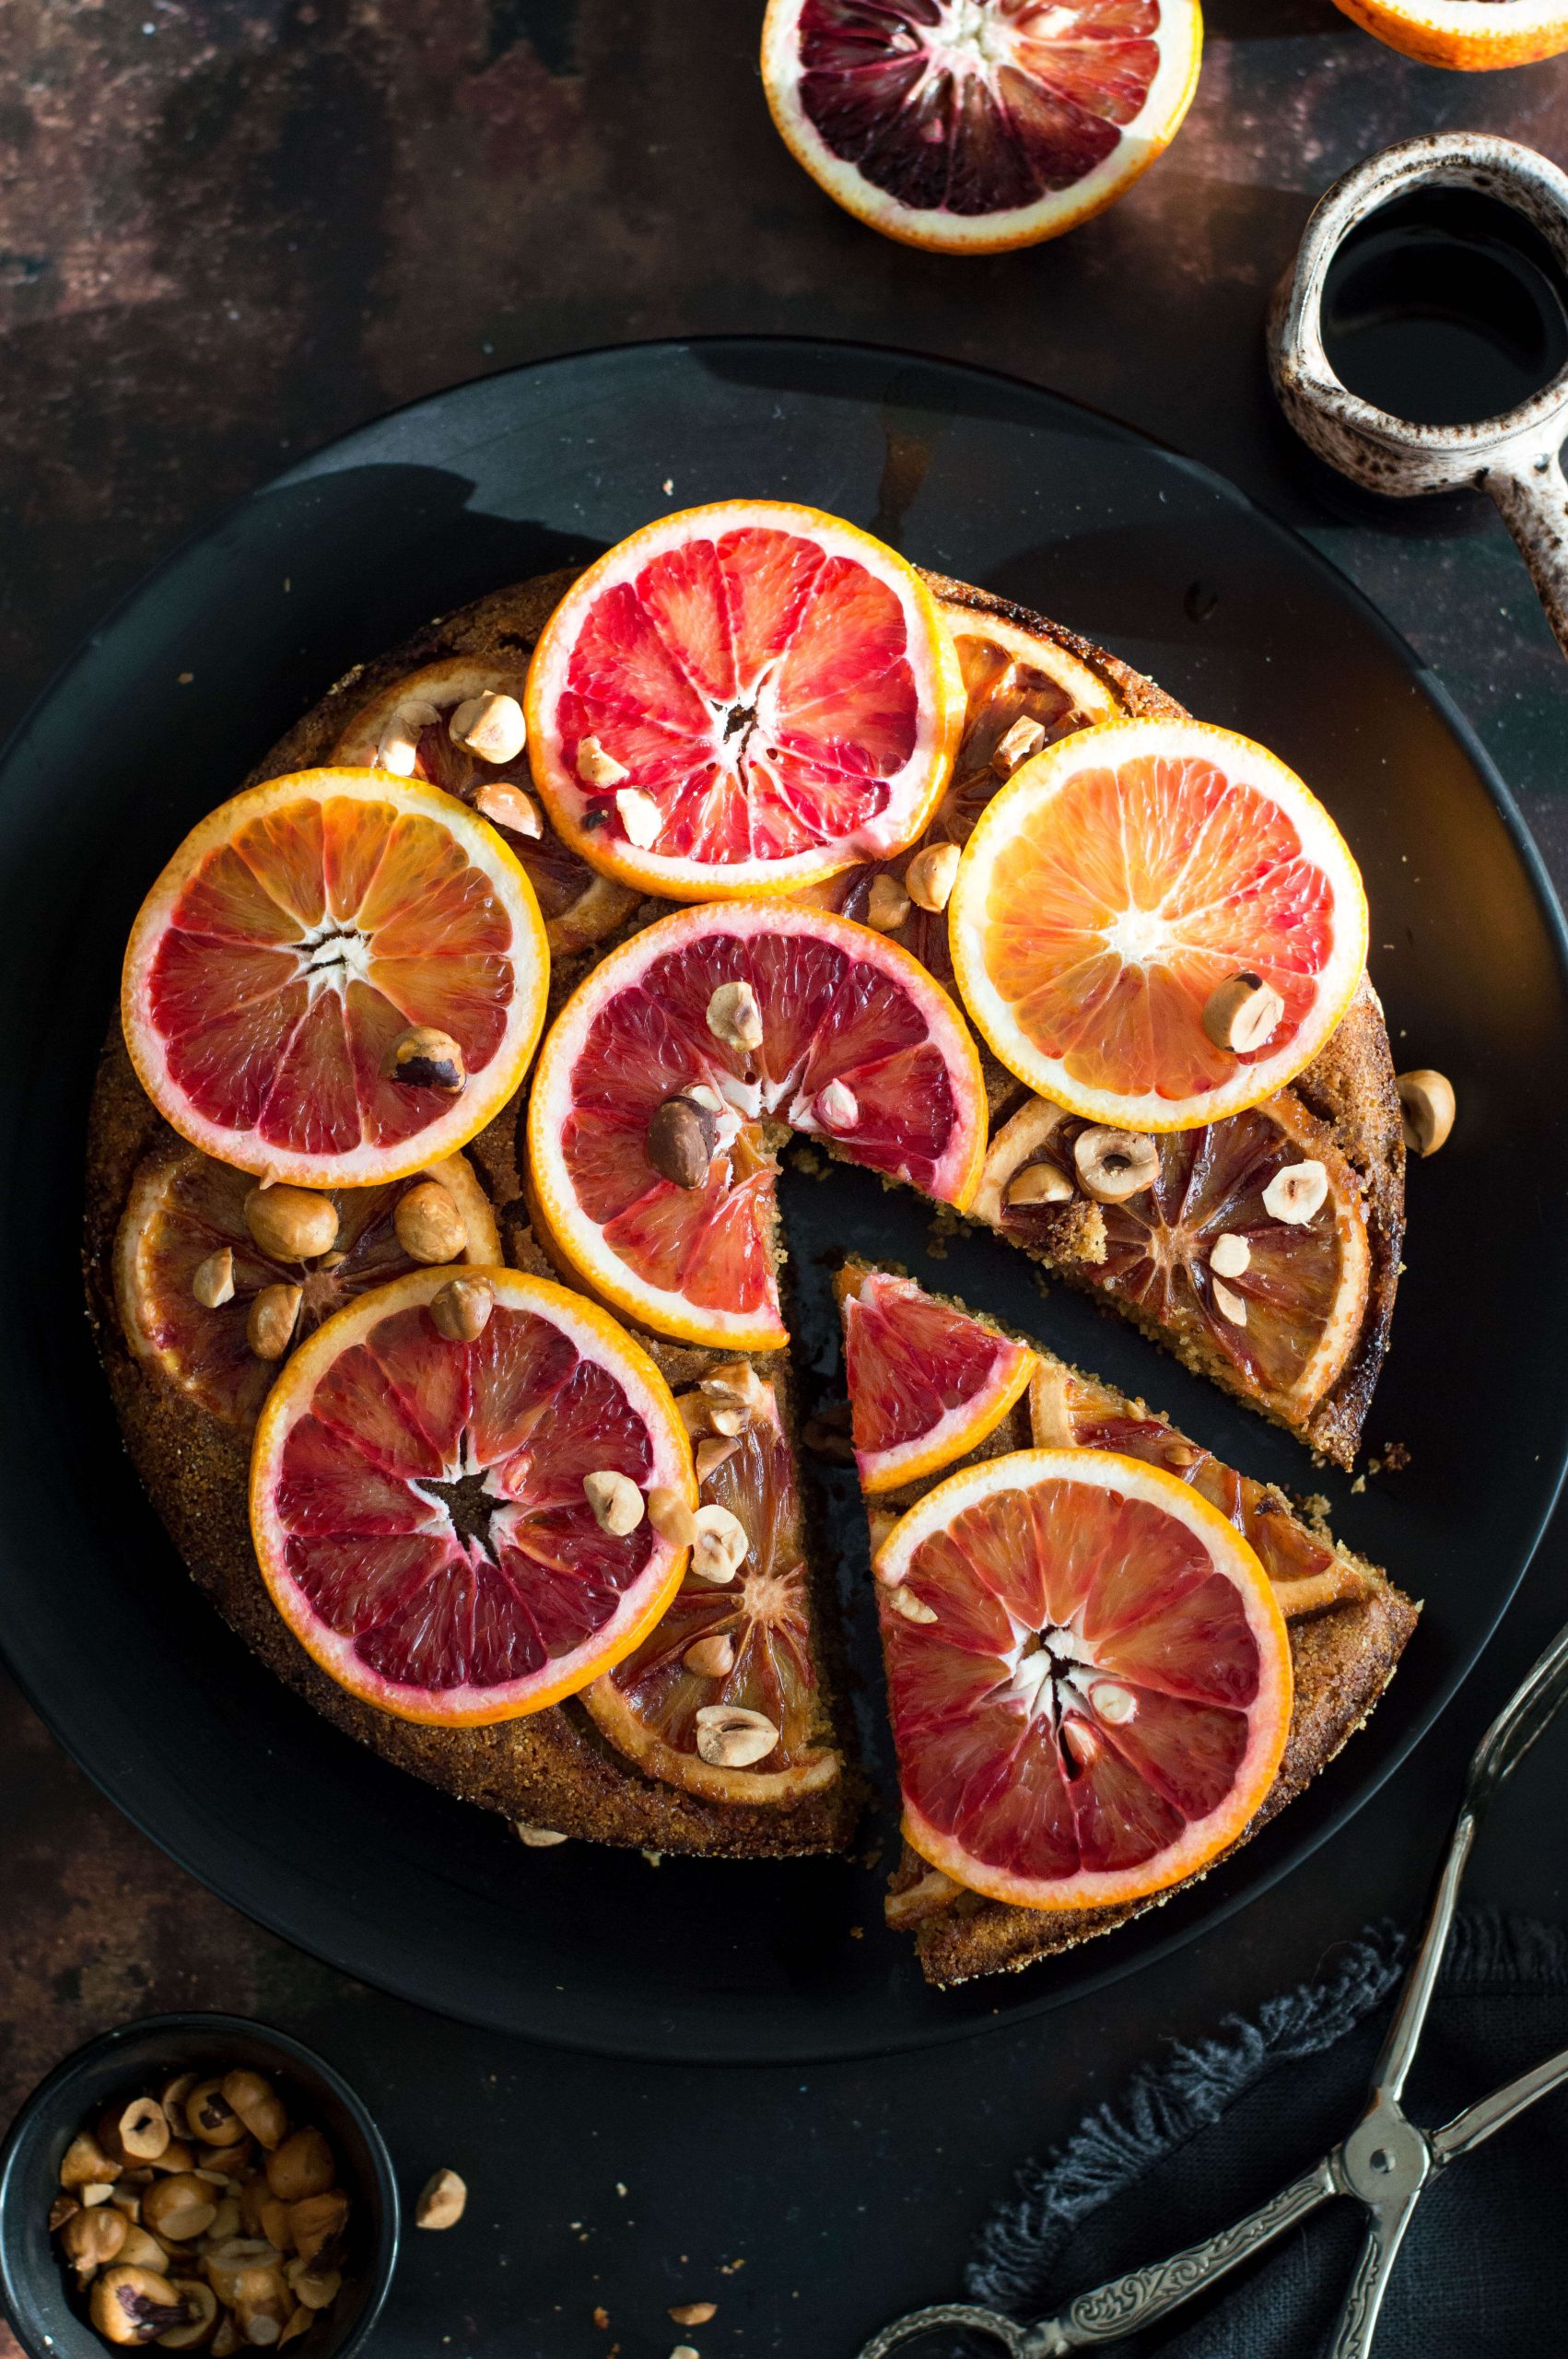 Top down view of upside down blood orange cake on a black plate